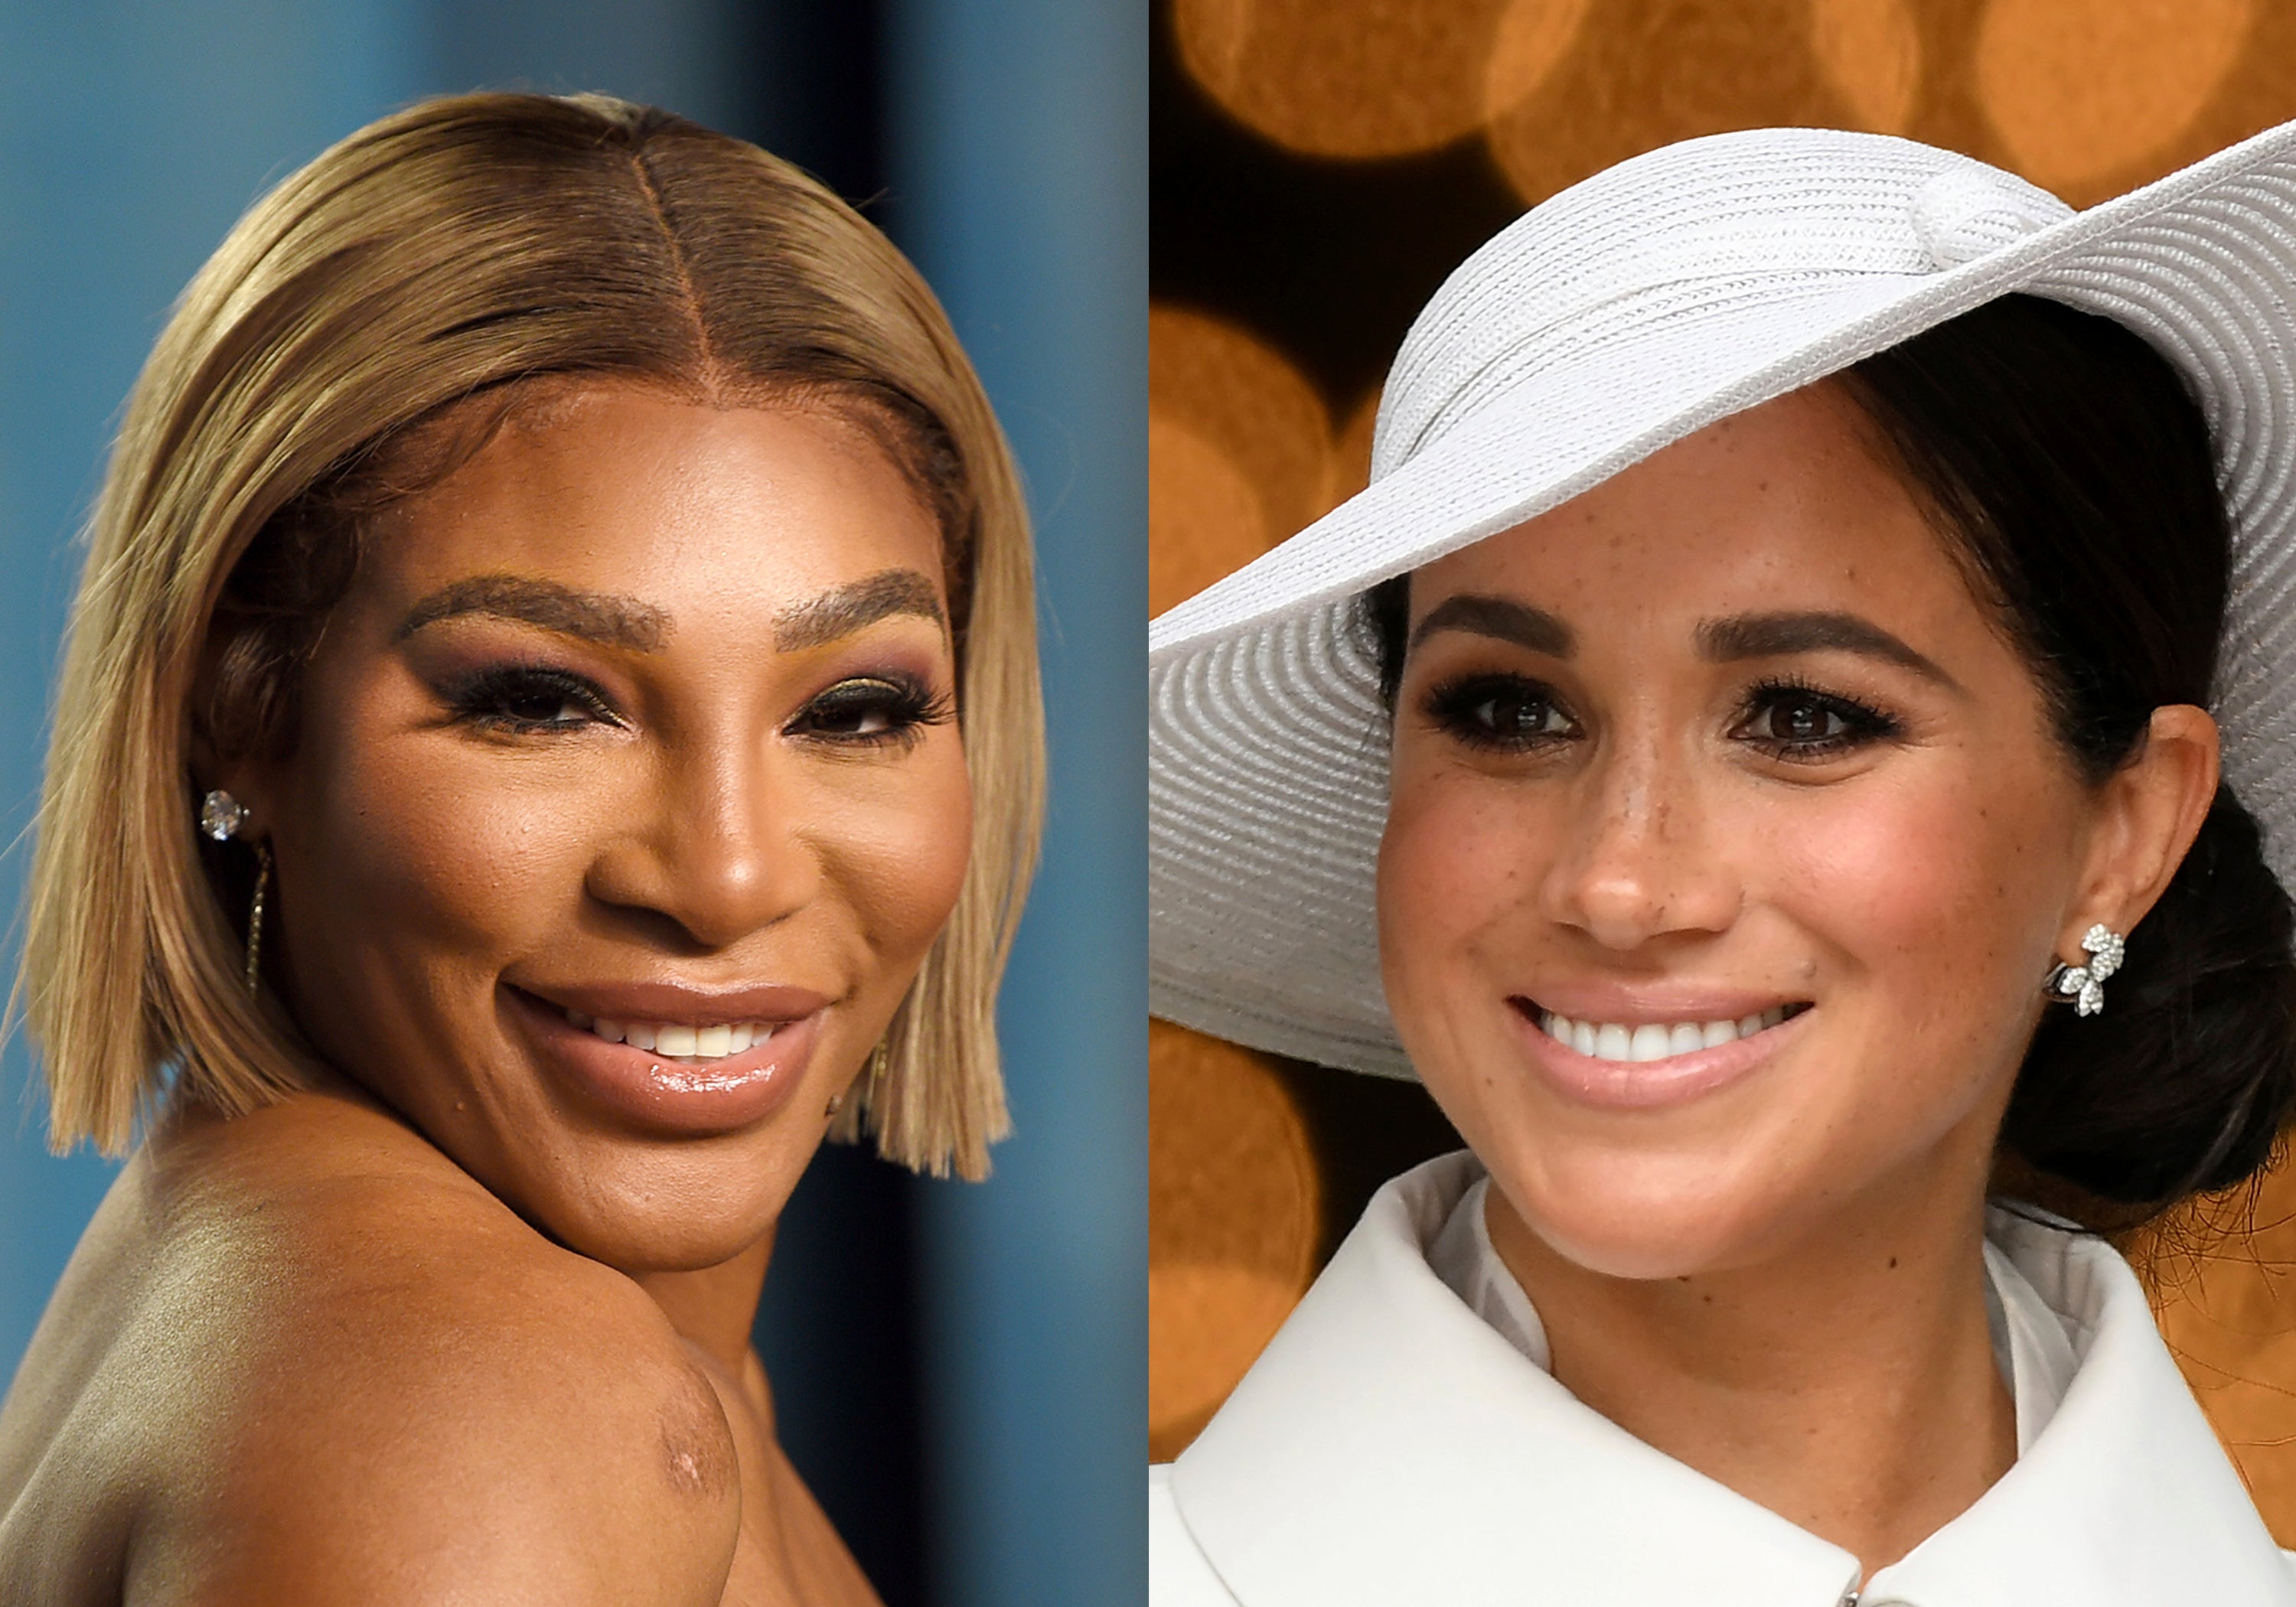 Serena Williams appears at the Vanity Fair Oscar Party in Beverly Hills, Calif., on March 27, 2022, left, and Meghan, Duchess of Sussex, appears at a service of thanksgiving for the reign of Queen Elizabeth II in London on June 3, 2022.